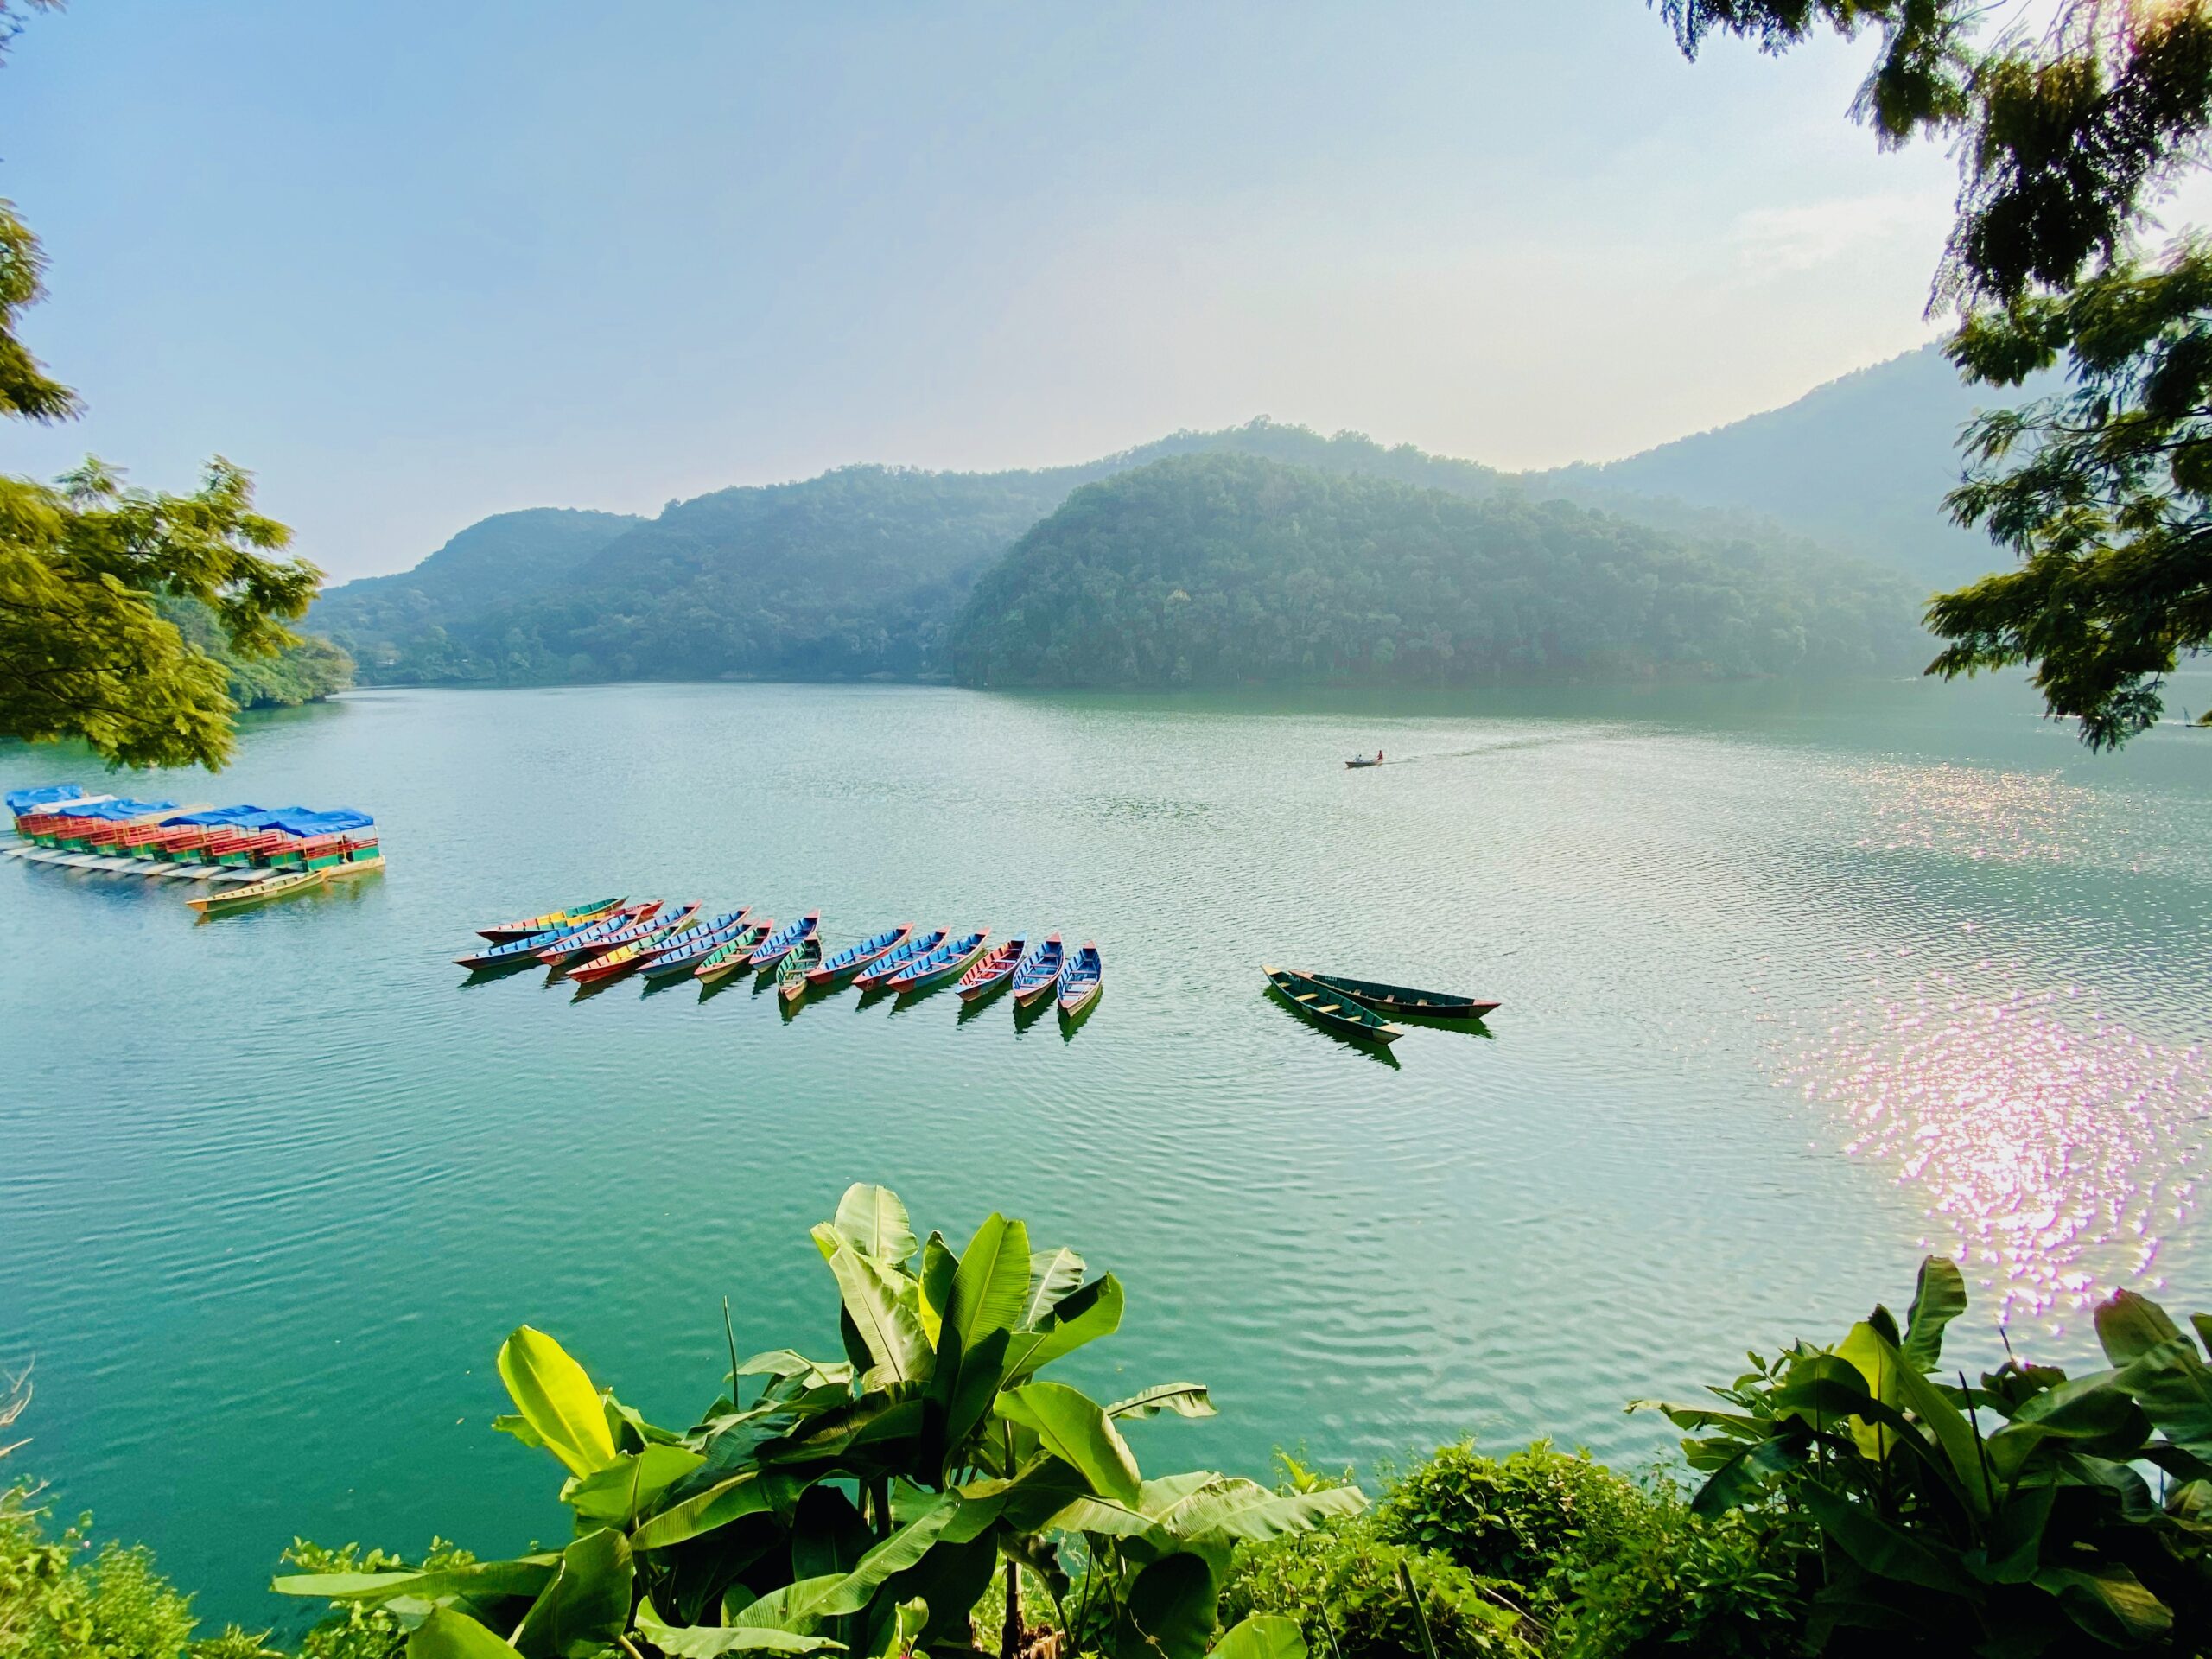 Pokhara to be declared as ‘tourism capital’